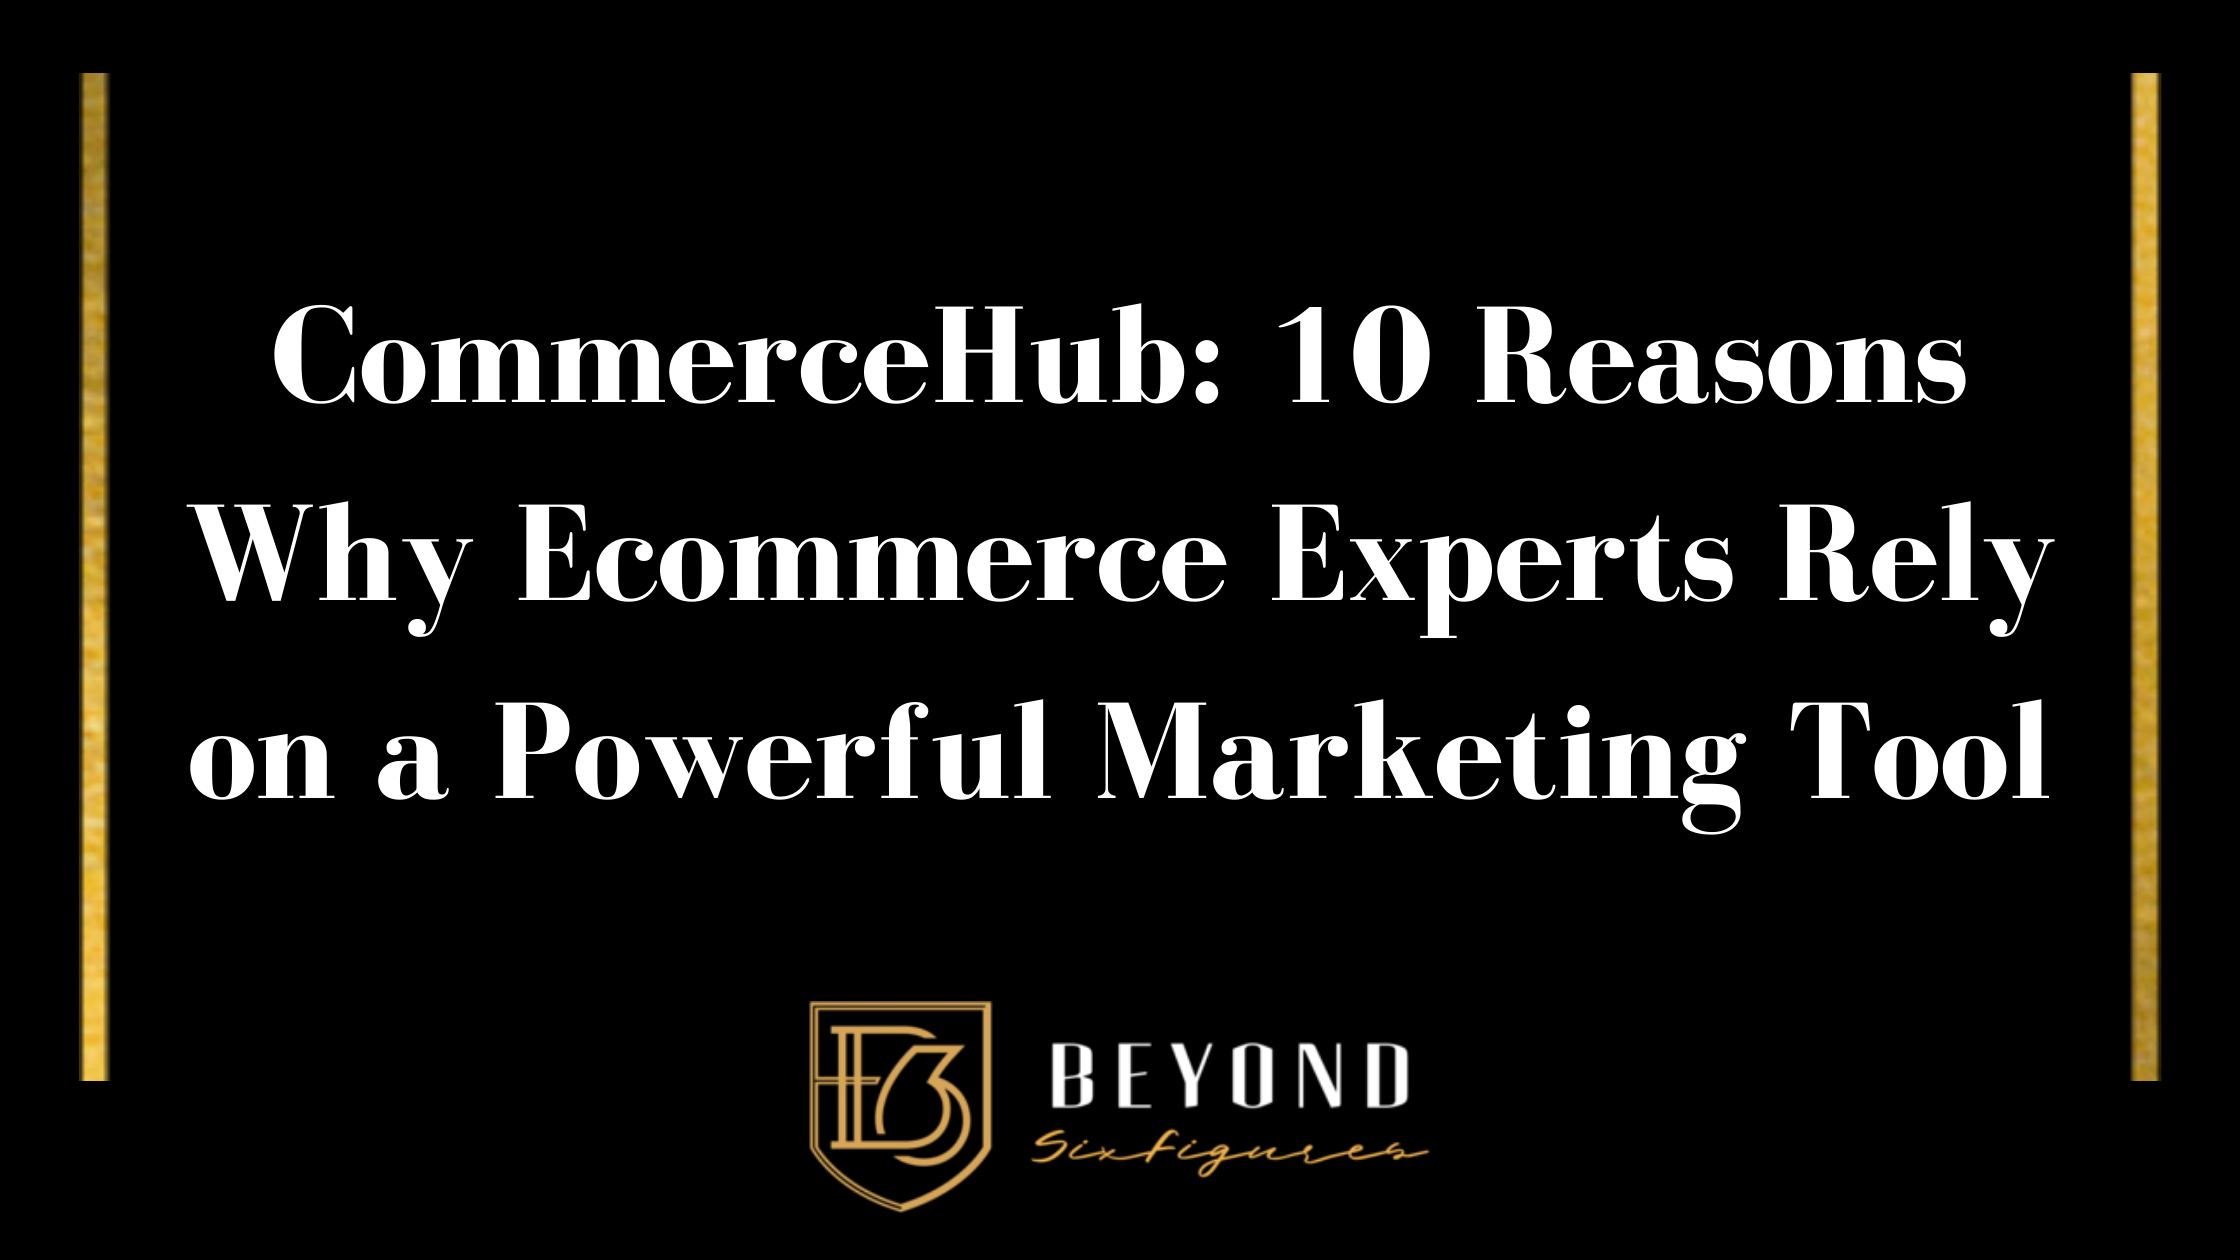 CommerceHub: 10 Reasons Why Ecommerce Experts Rely on a Powerful Marketing Tool